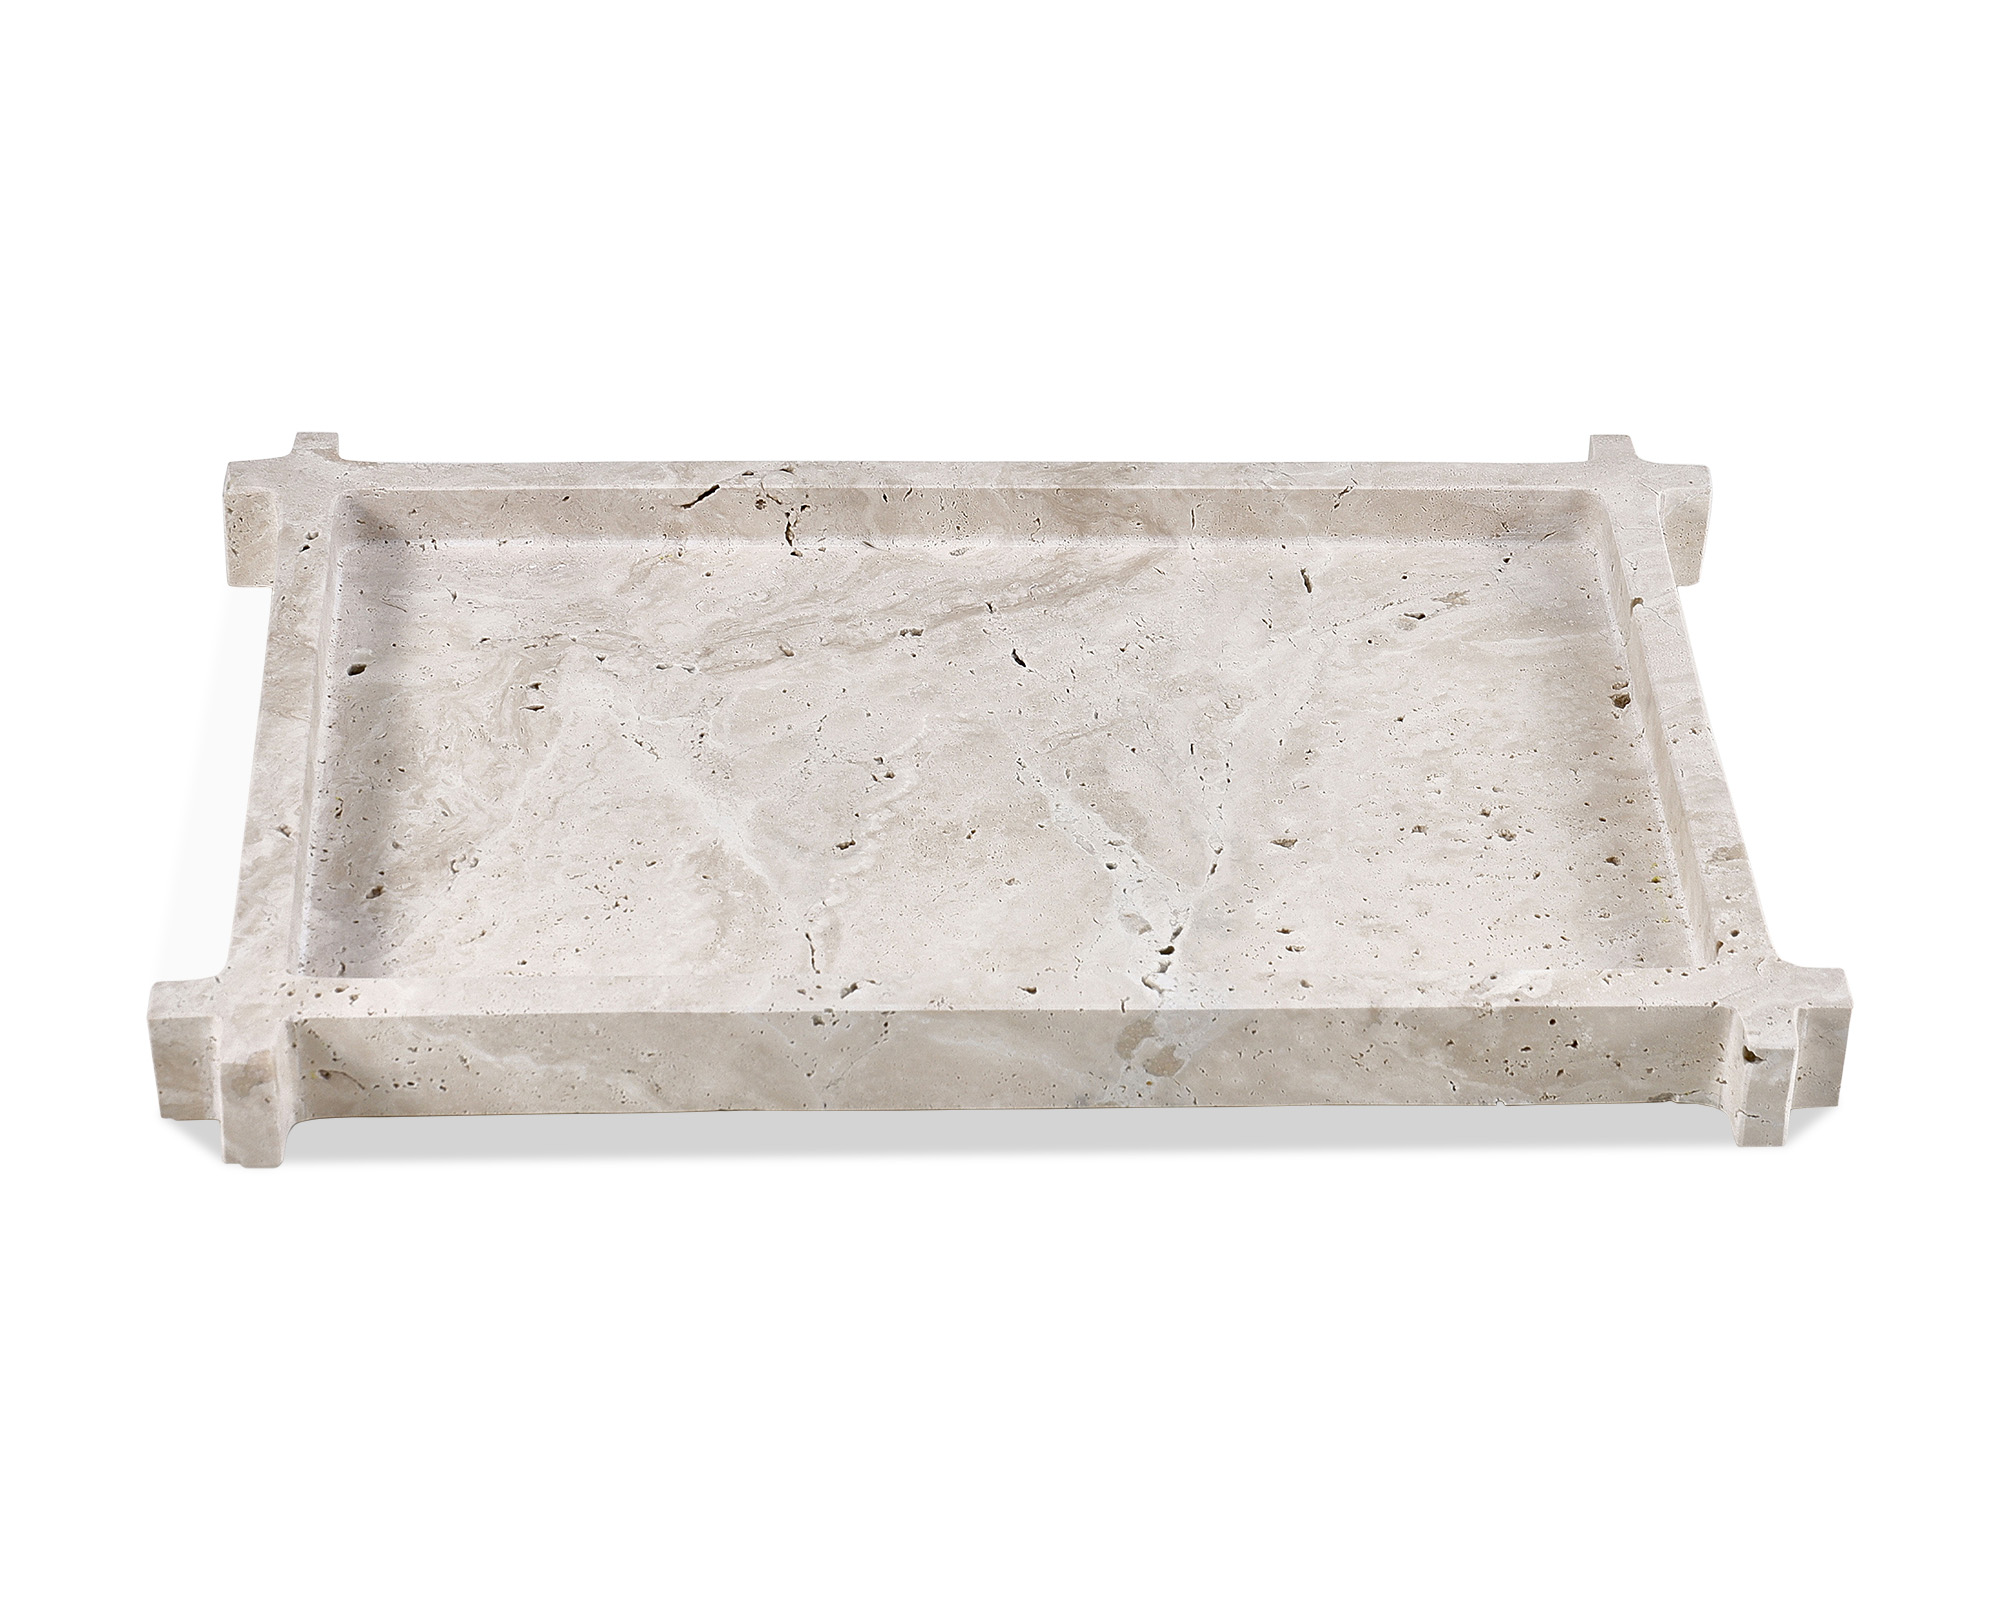 19 in. x 10-1/4 in. x 1 in. Tangier Champagne Tone Etched Tray